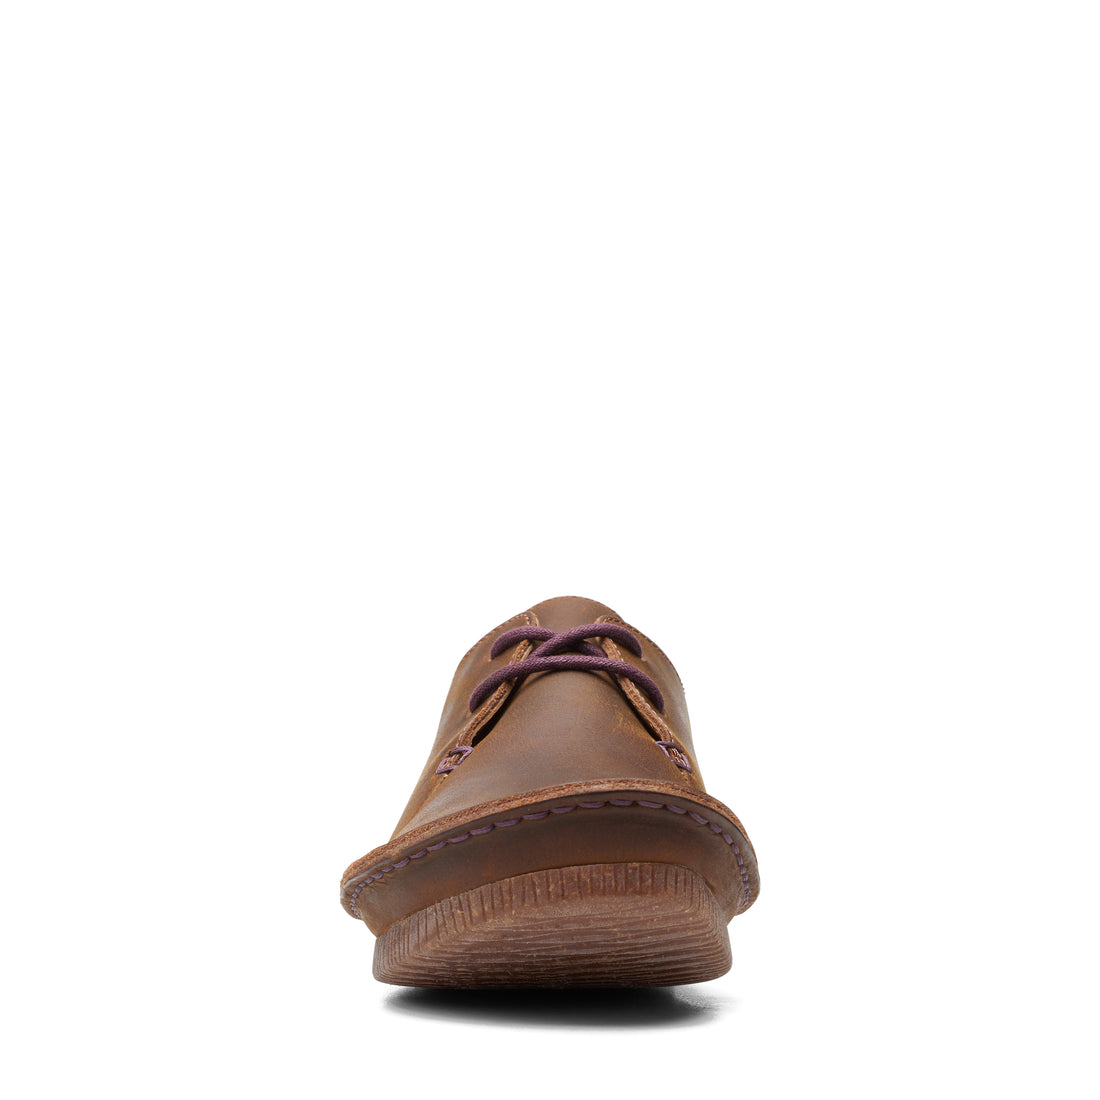 Clarks Janey Mae Oxford Shoes